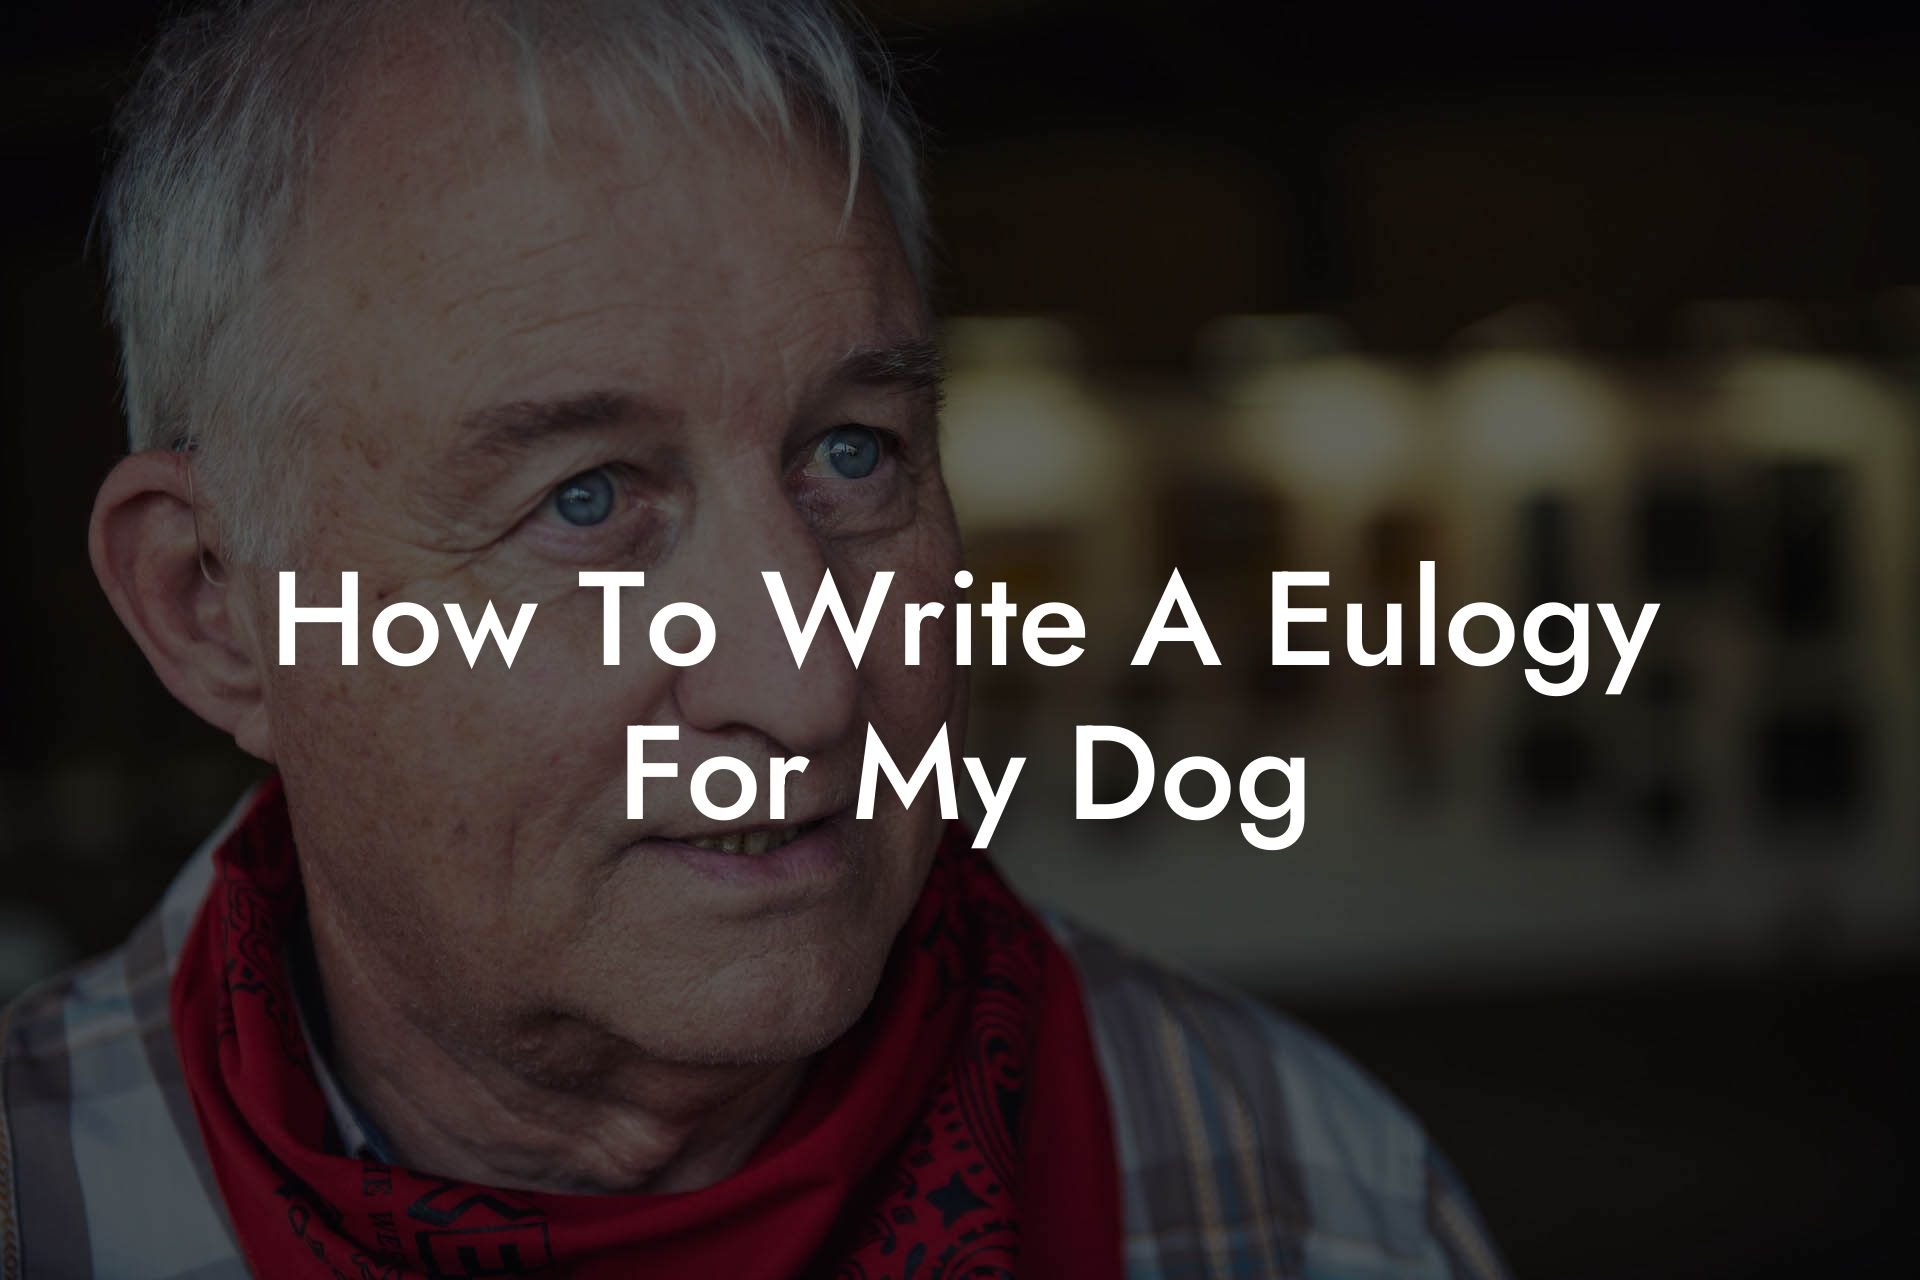 How To Write A Eulogy For My Dog